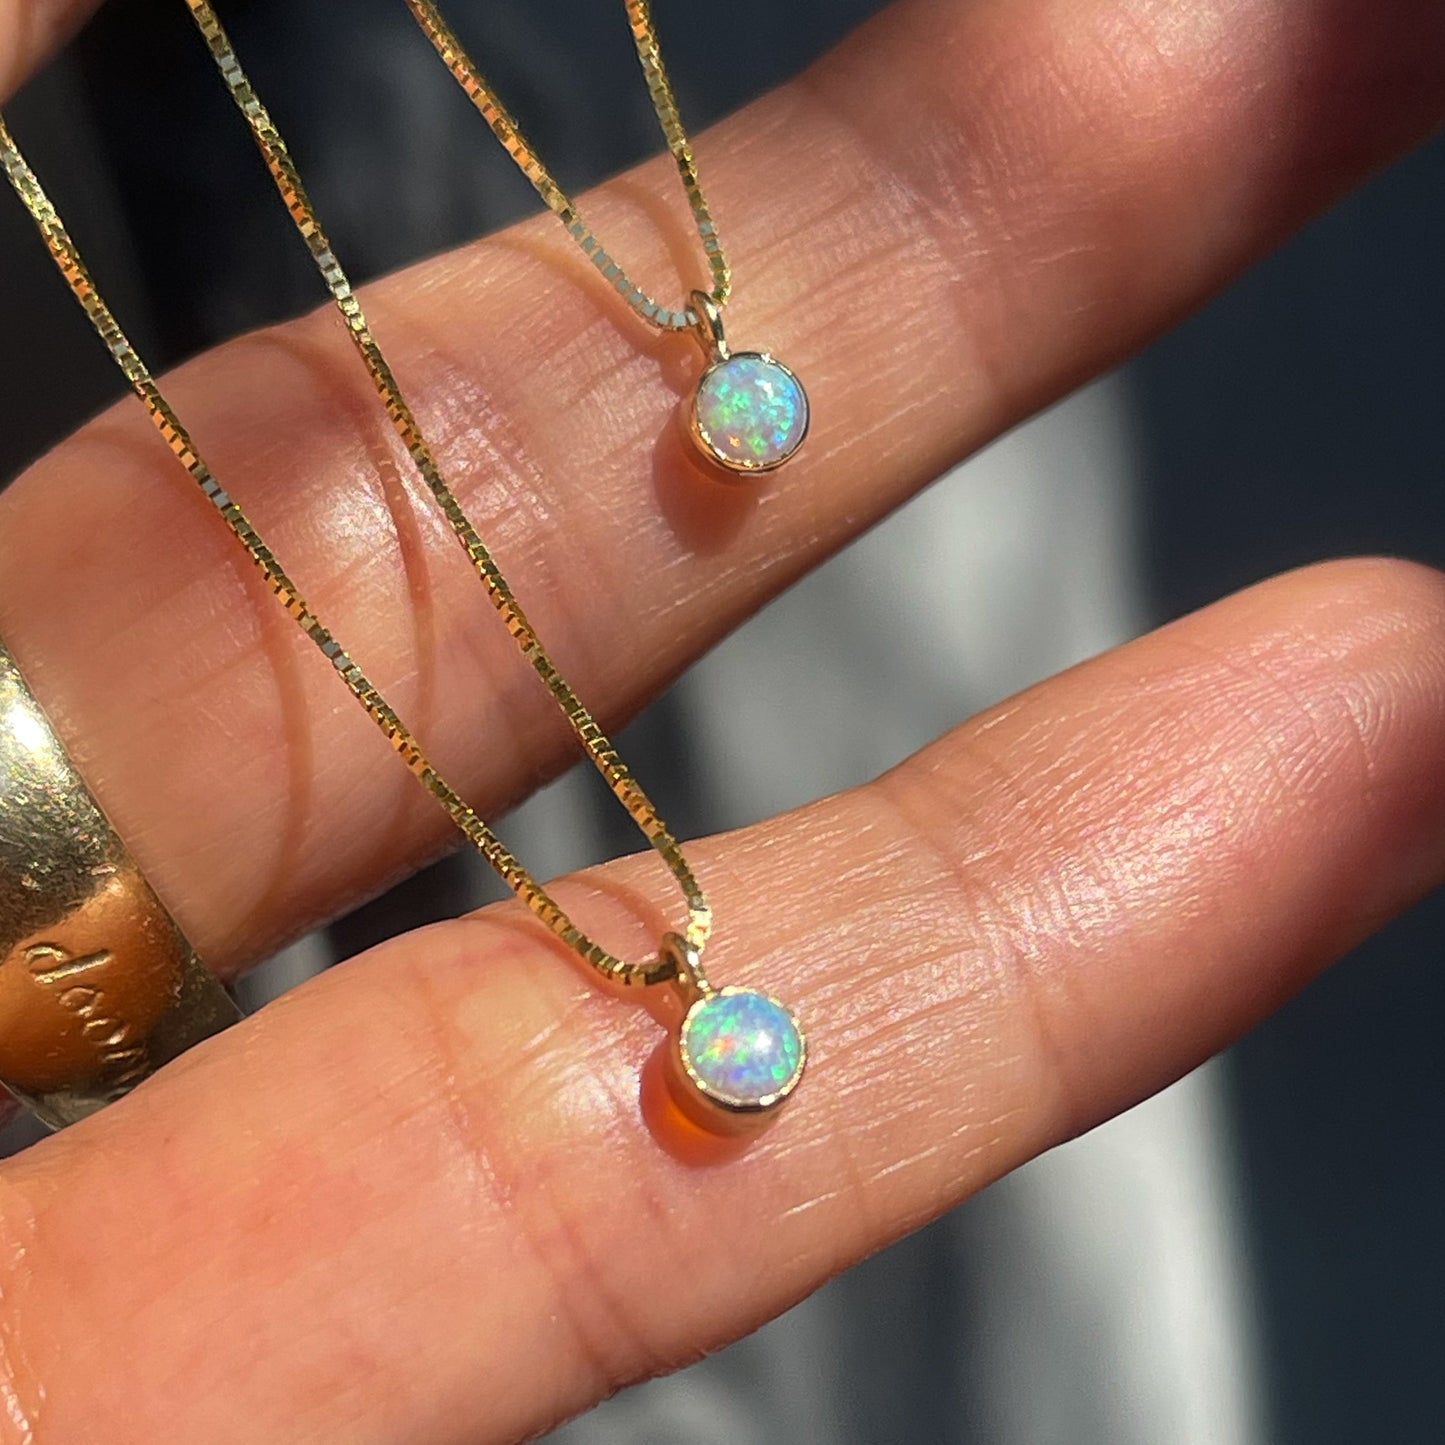 Two Australian Opal Necklaces by NIXIN Jewelry rest upon a hand. The Crystal Opals are fixed in bezel settings that slide along a 16" chain.